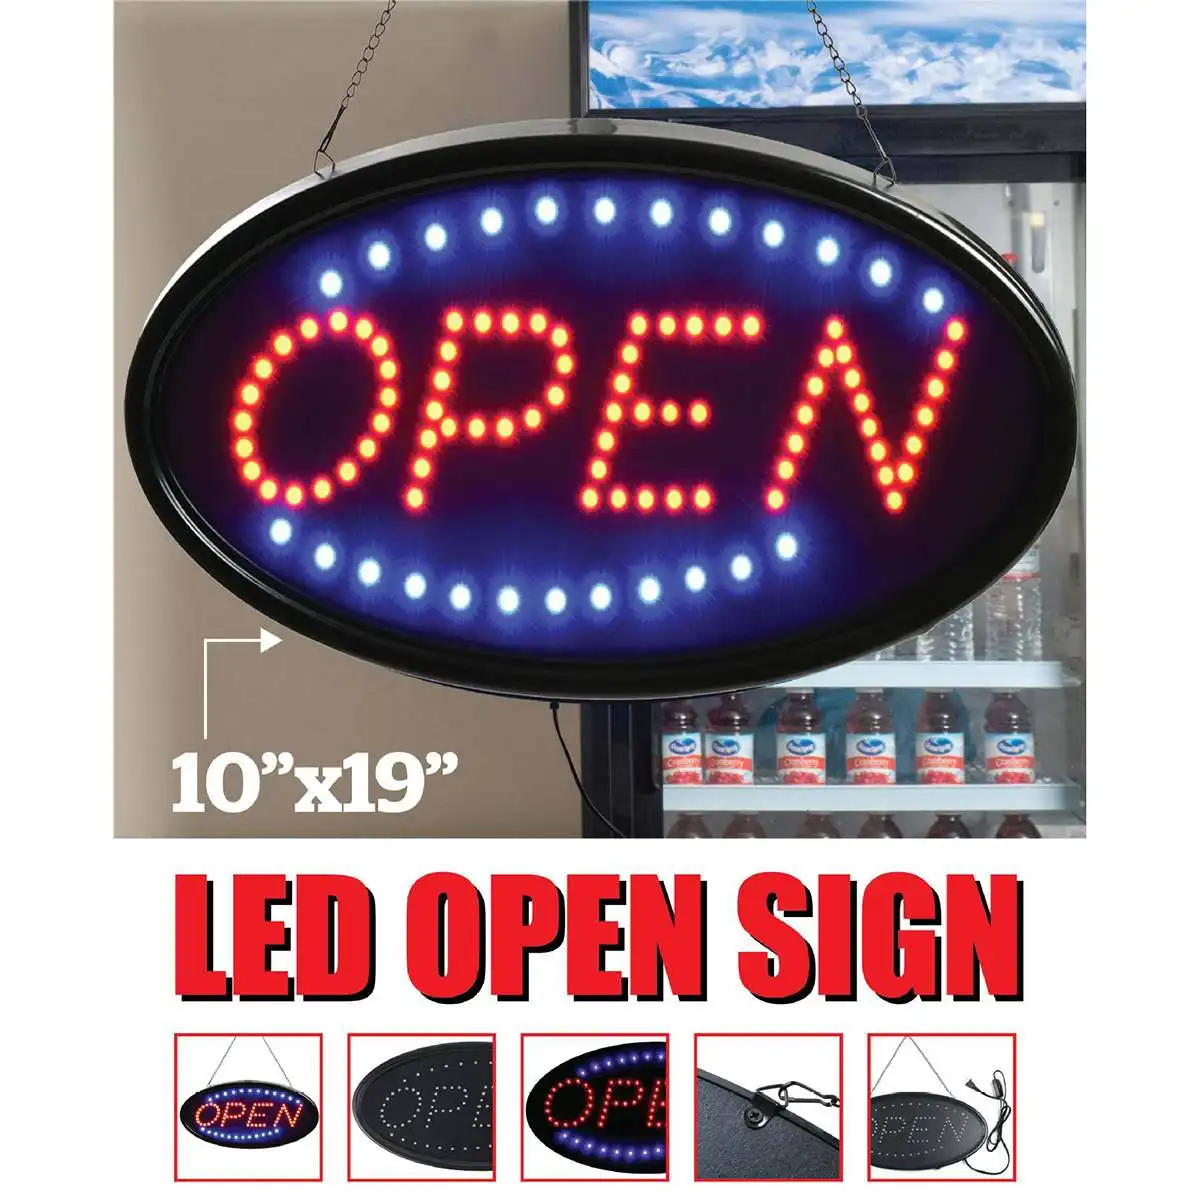 Window Business Shop LED Neon Open 48X25cm Store Display 19X10inch HS-Zak Miller LED ATM Sign Business Open Sign Advertisement Board Electric Display Board Signage 